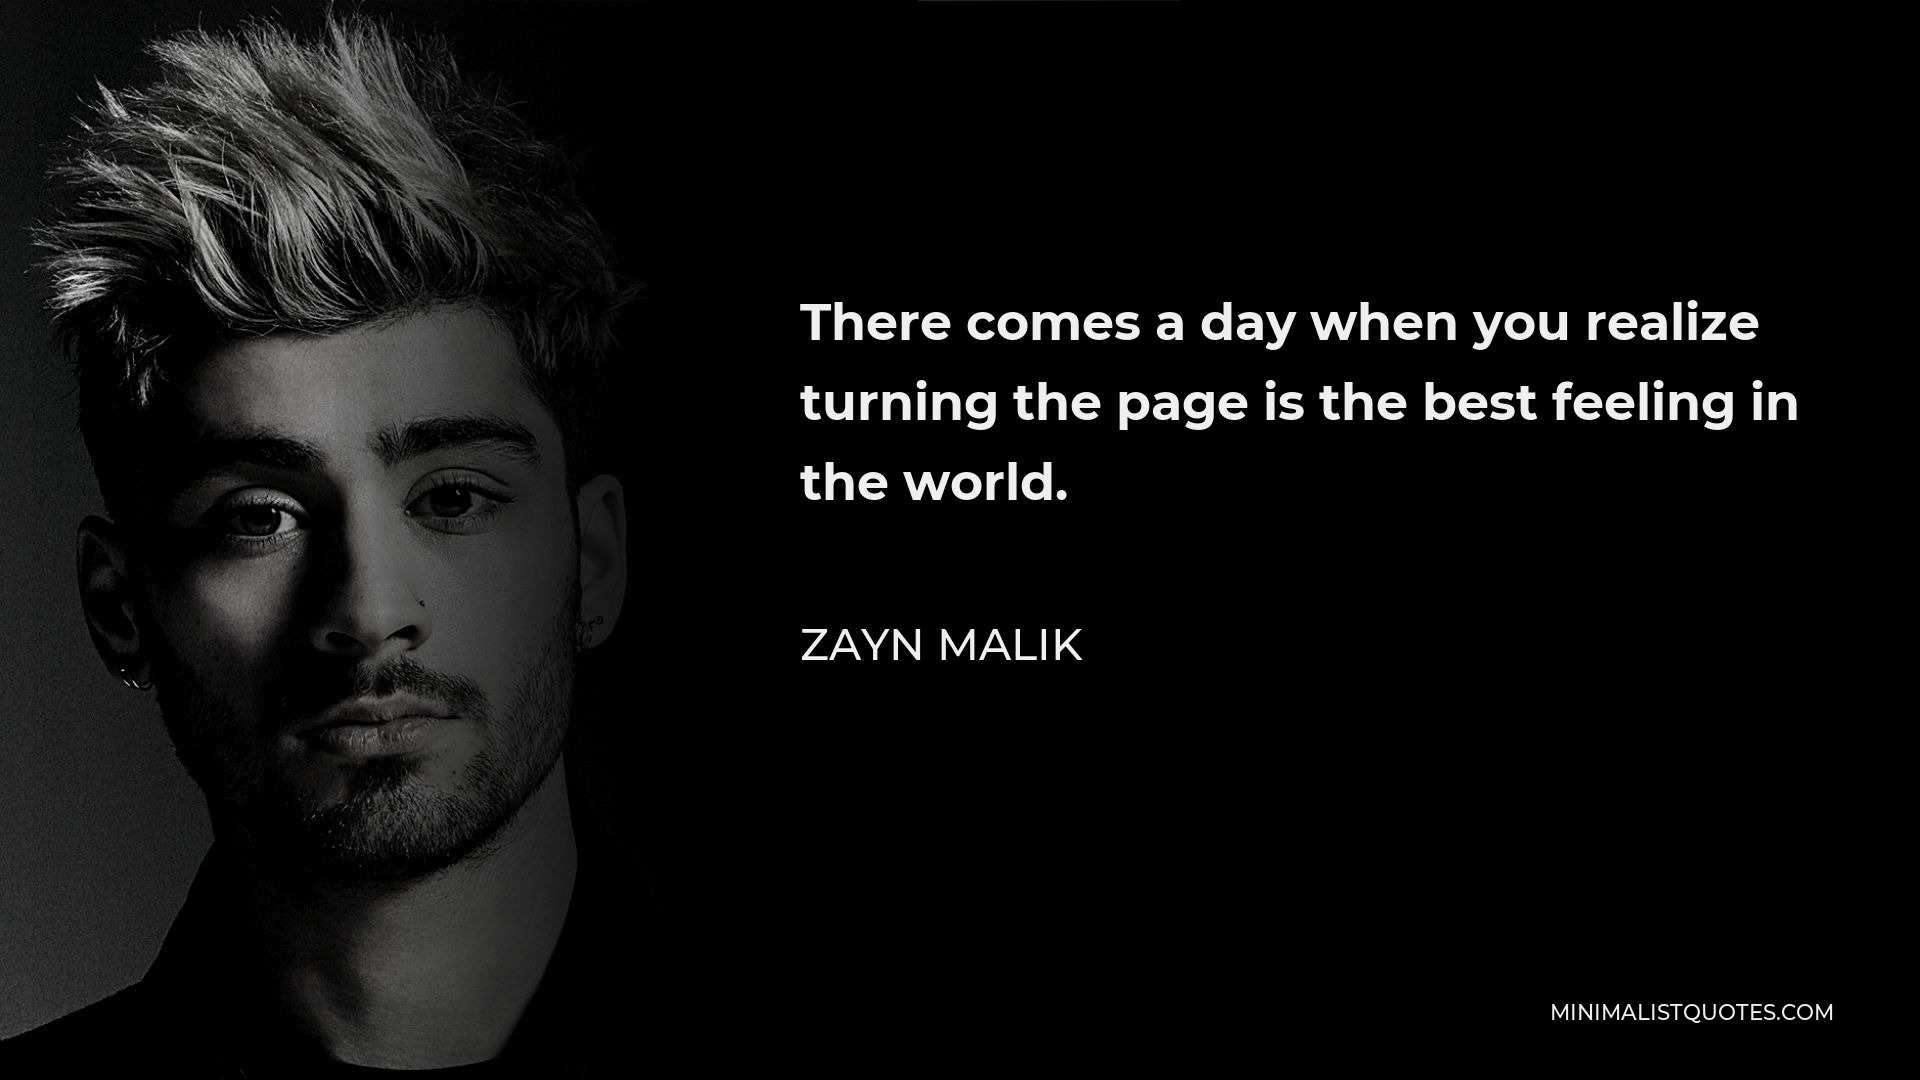 Zayn Malik Quote - There comes a day when you realize turning the page is the best feeling in the world.